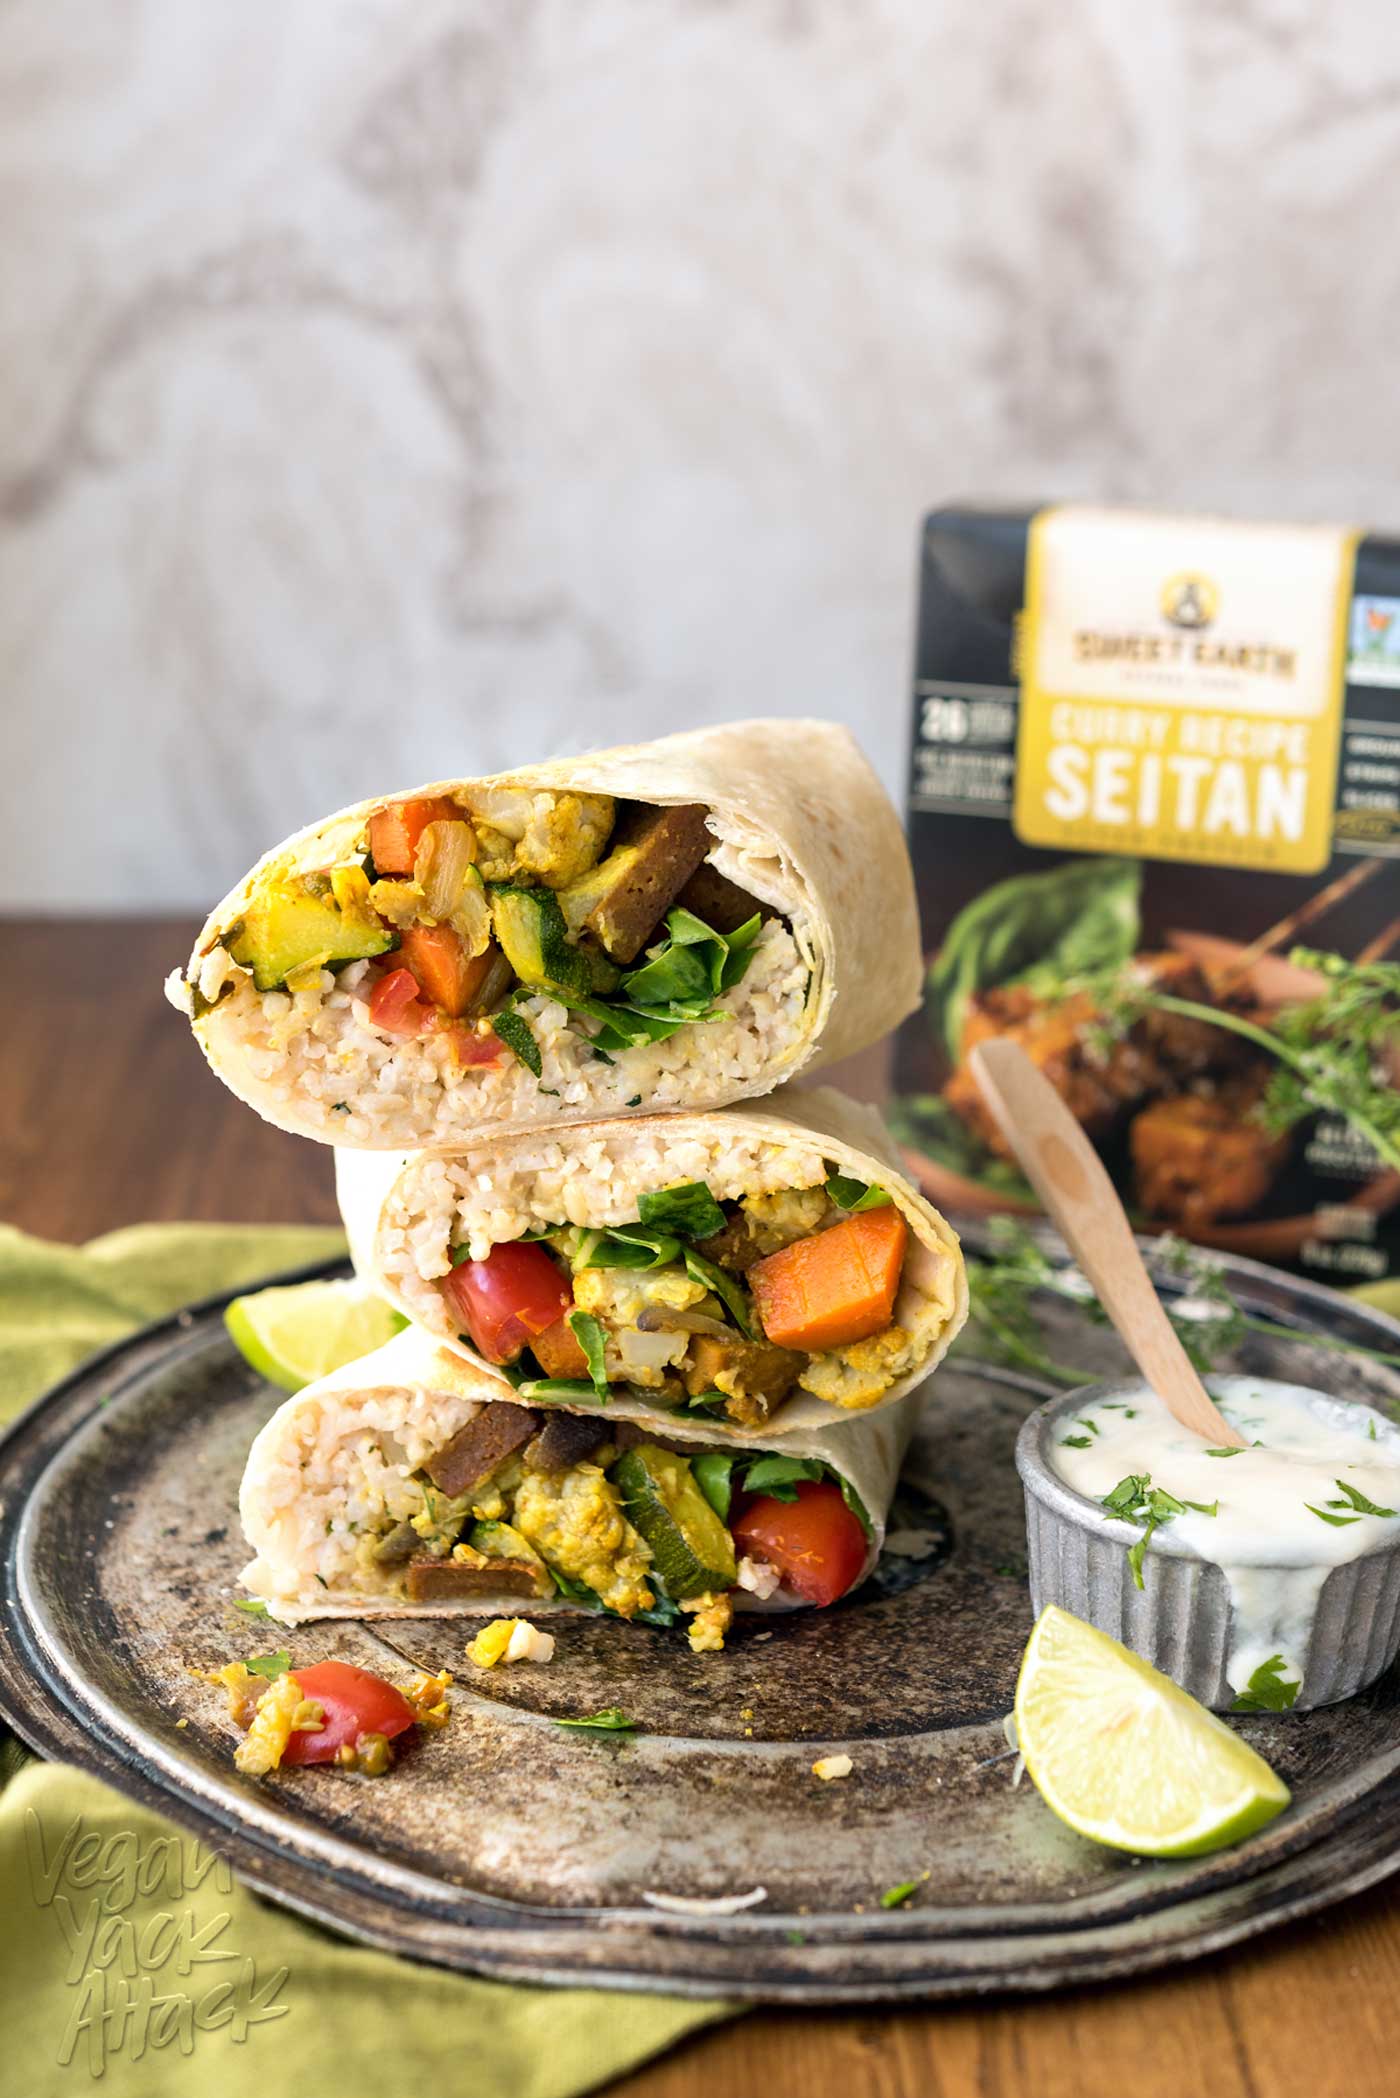 This Curry Cauliflower Burrito is easy-to-make, filled with awesome flavors, and can even be frozen for weekly lunches! Made with delicious Sweet Earth Foods’ Curry Satay. Mmm.. #vegan #nutfree #veganyackattack